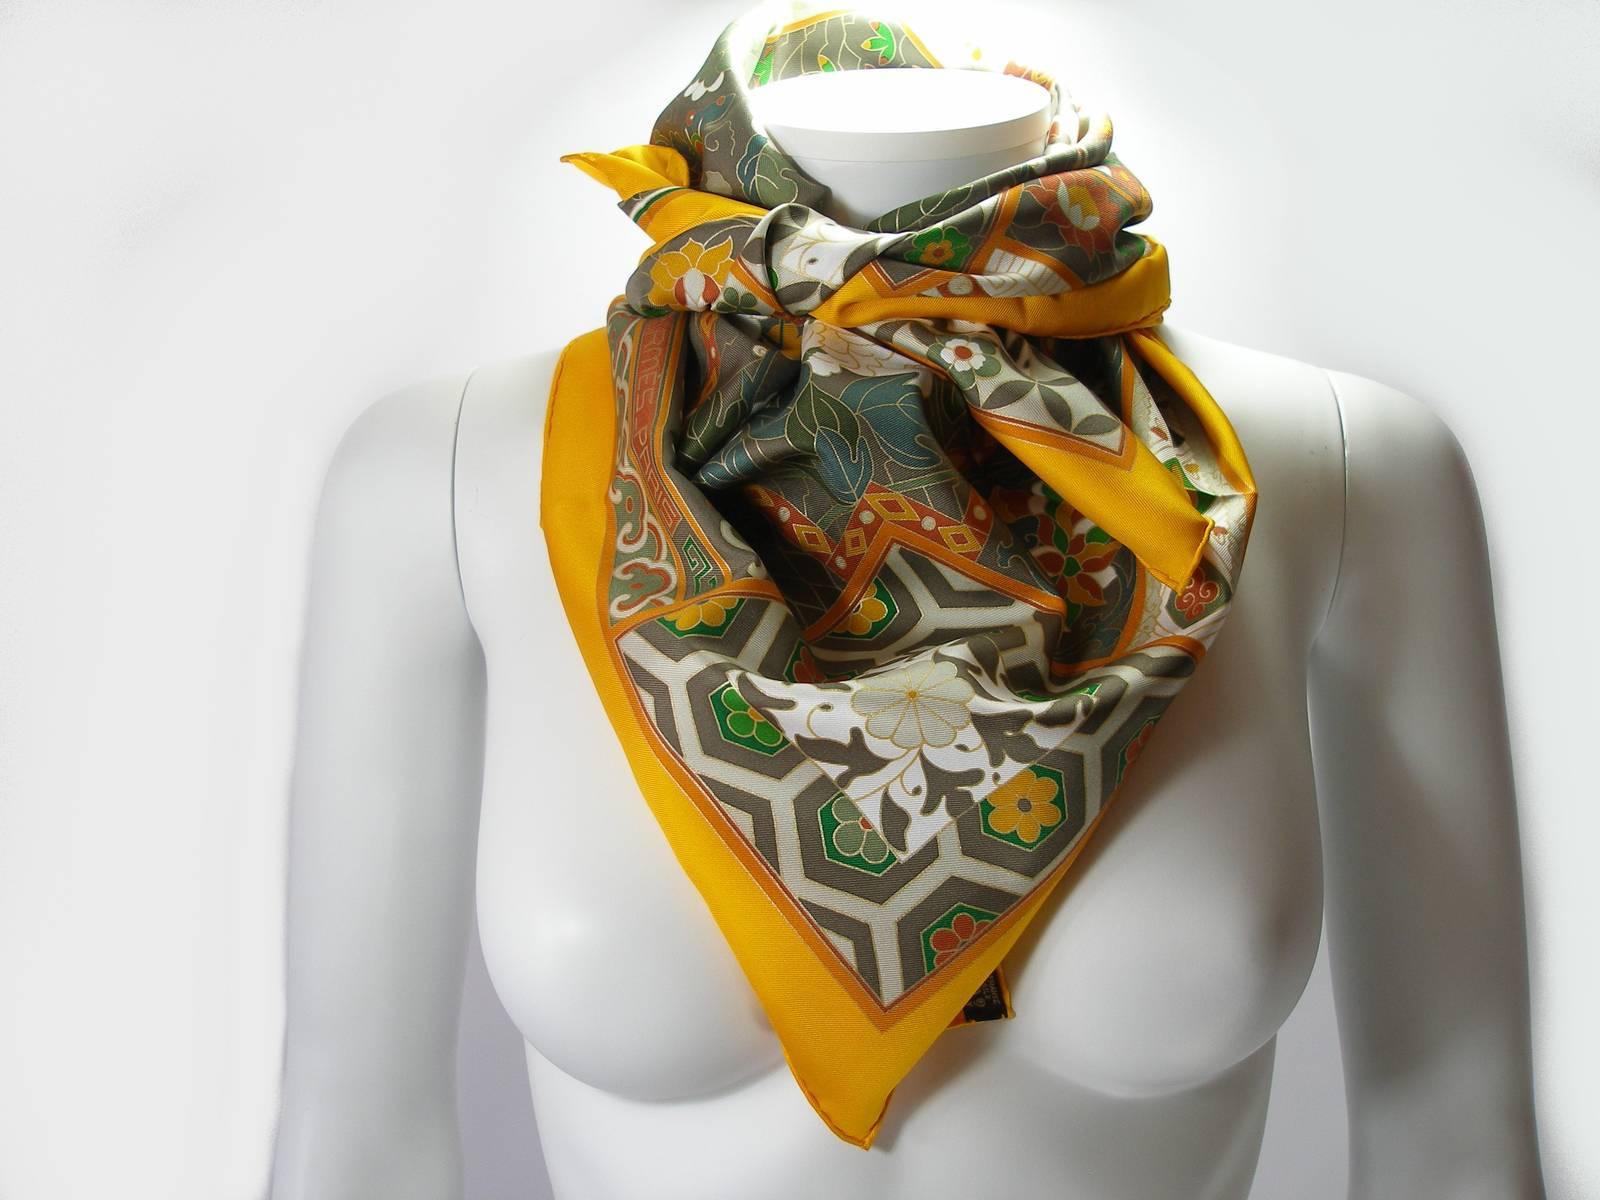 Hermès Scarf 
New Collection
Impériales 
By Catherine Baschet
Size : 90 x 90 cm 
100 % silk 
Color : Multicolor 
Tags and copyright are intacts 
Sorry no box 
Customs fees and vat are included
Thank you for visiting my shop !